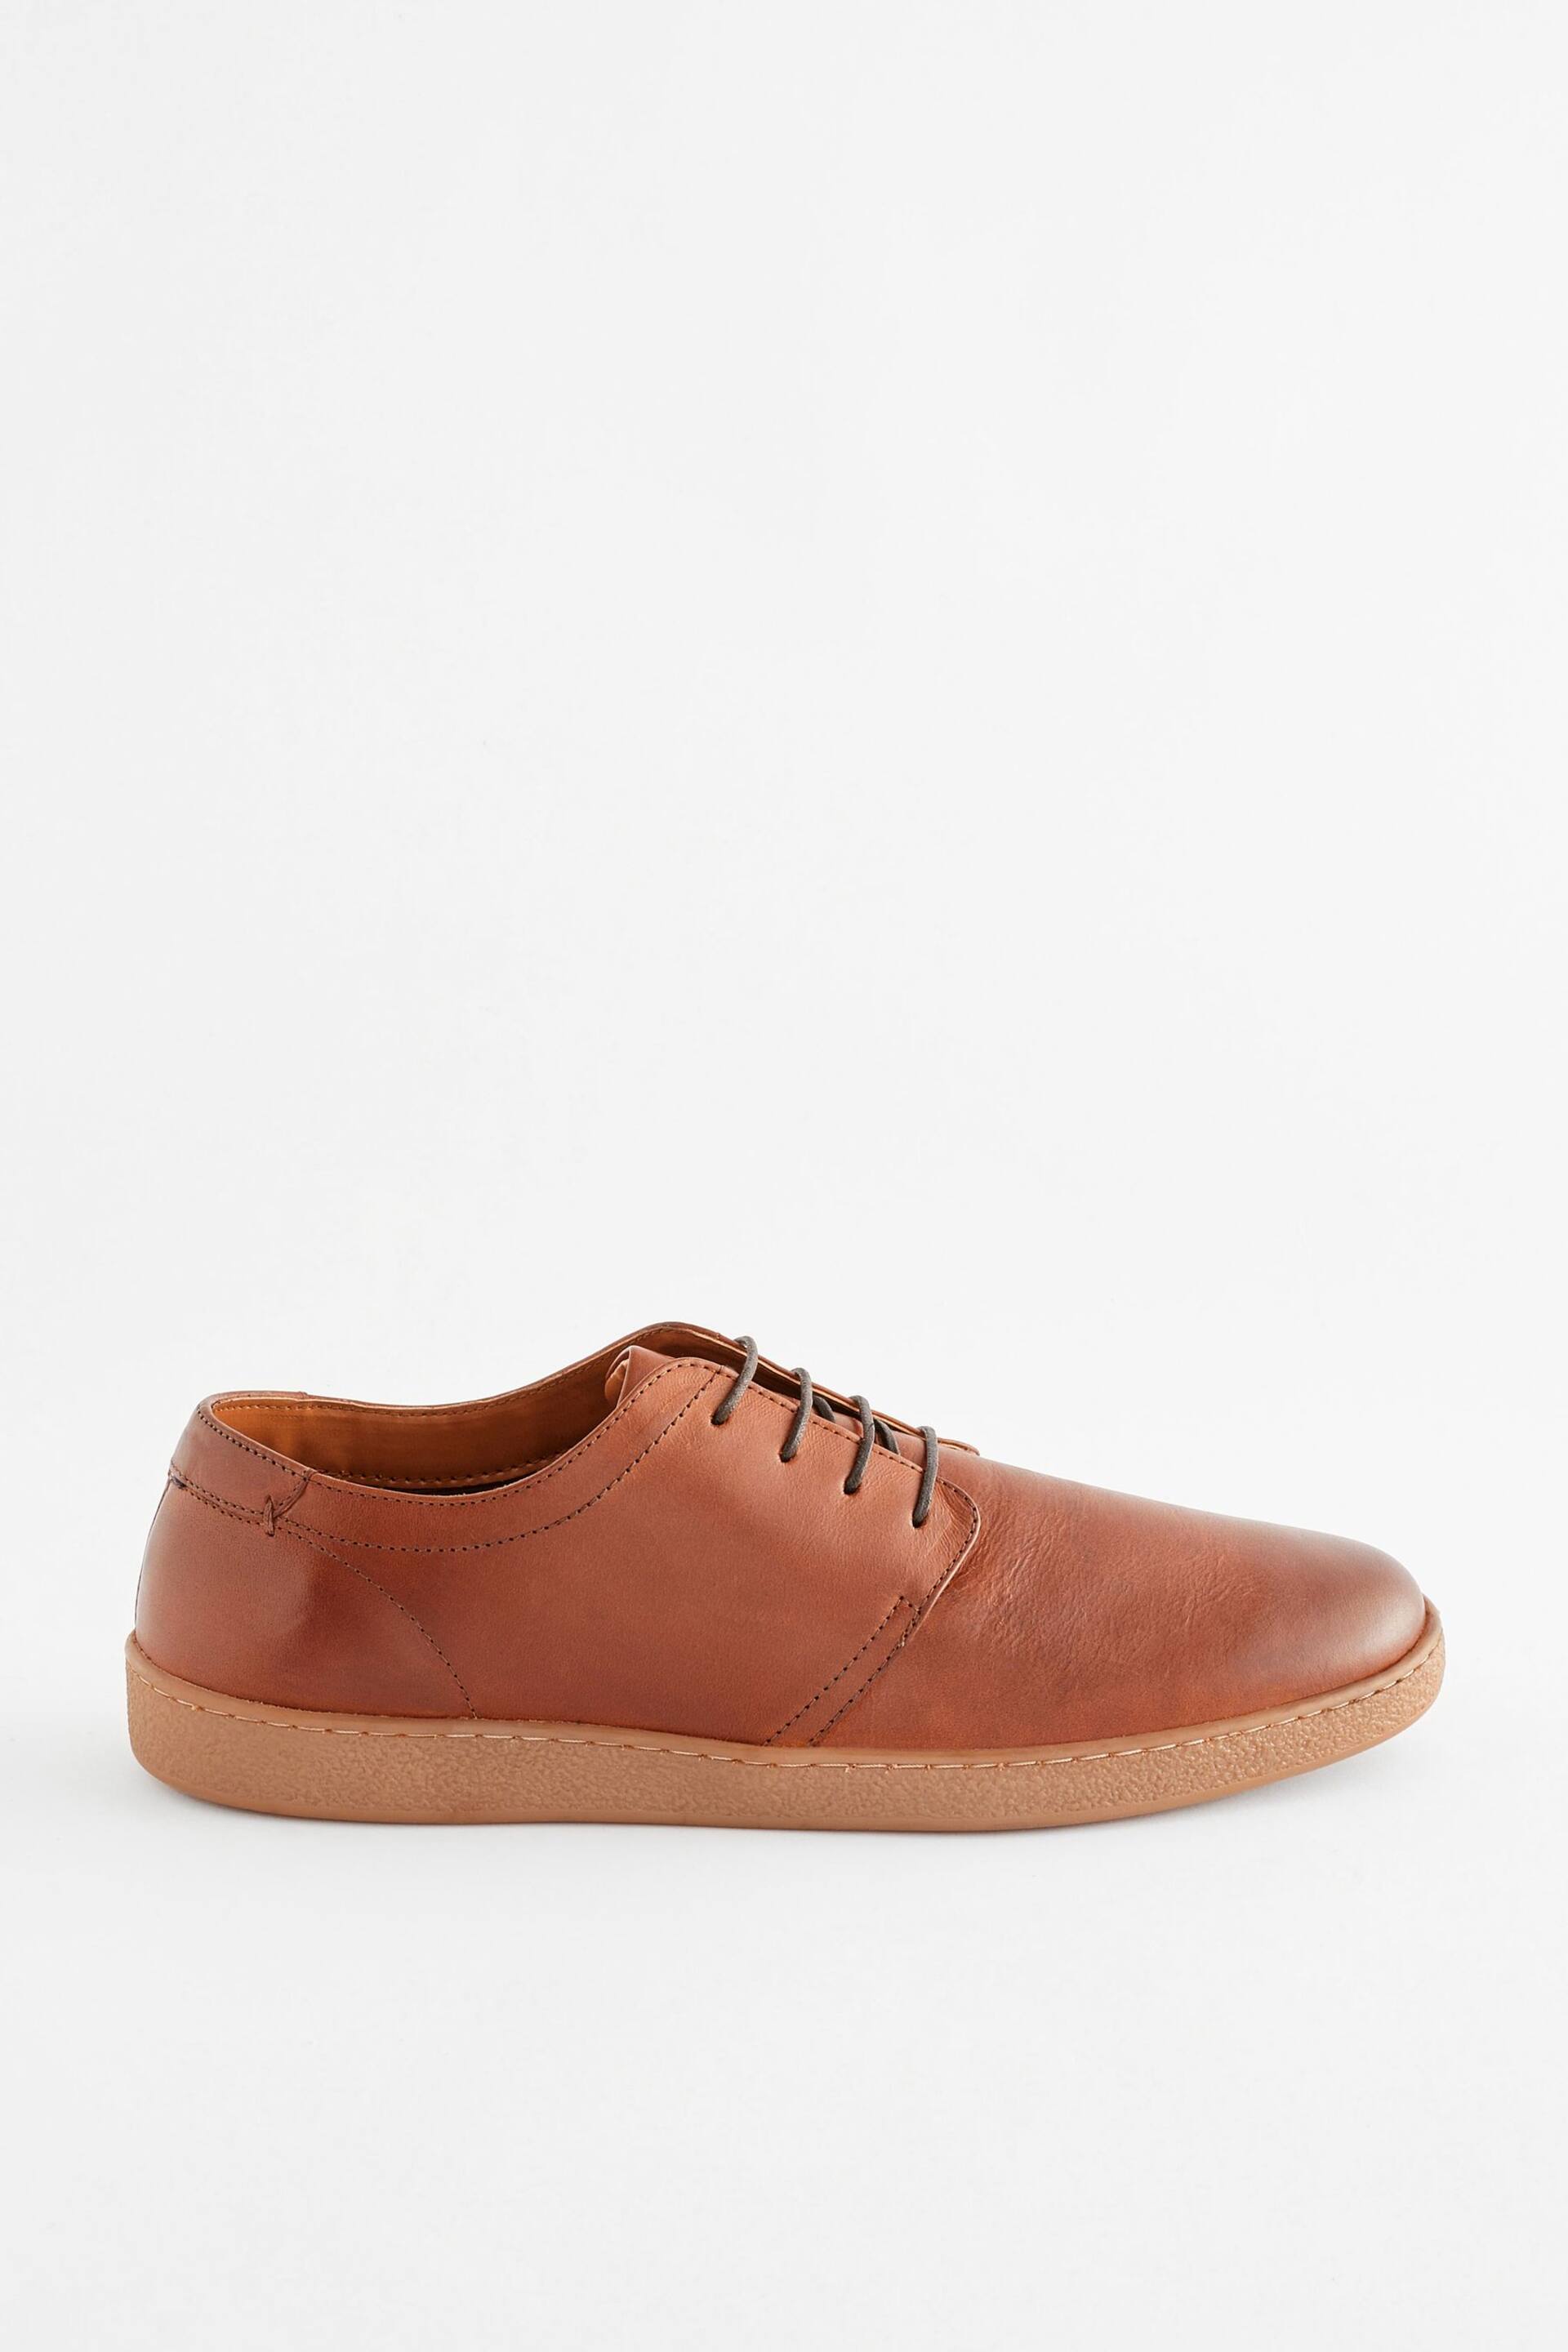 Brown Suede Derby Shoes - Image 2 of 5